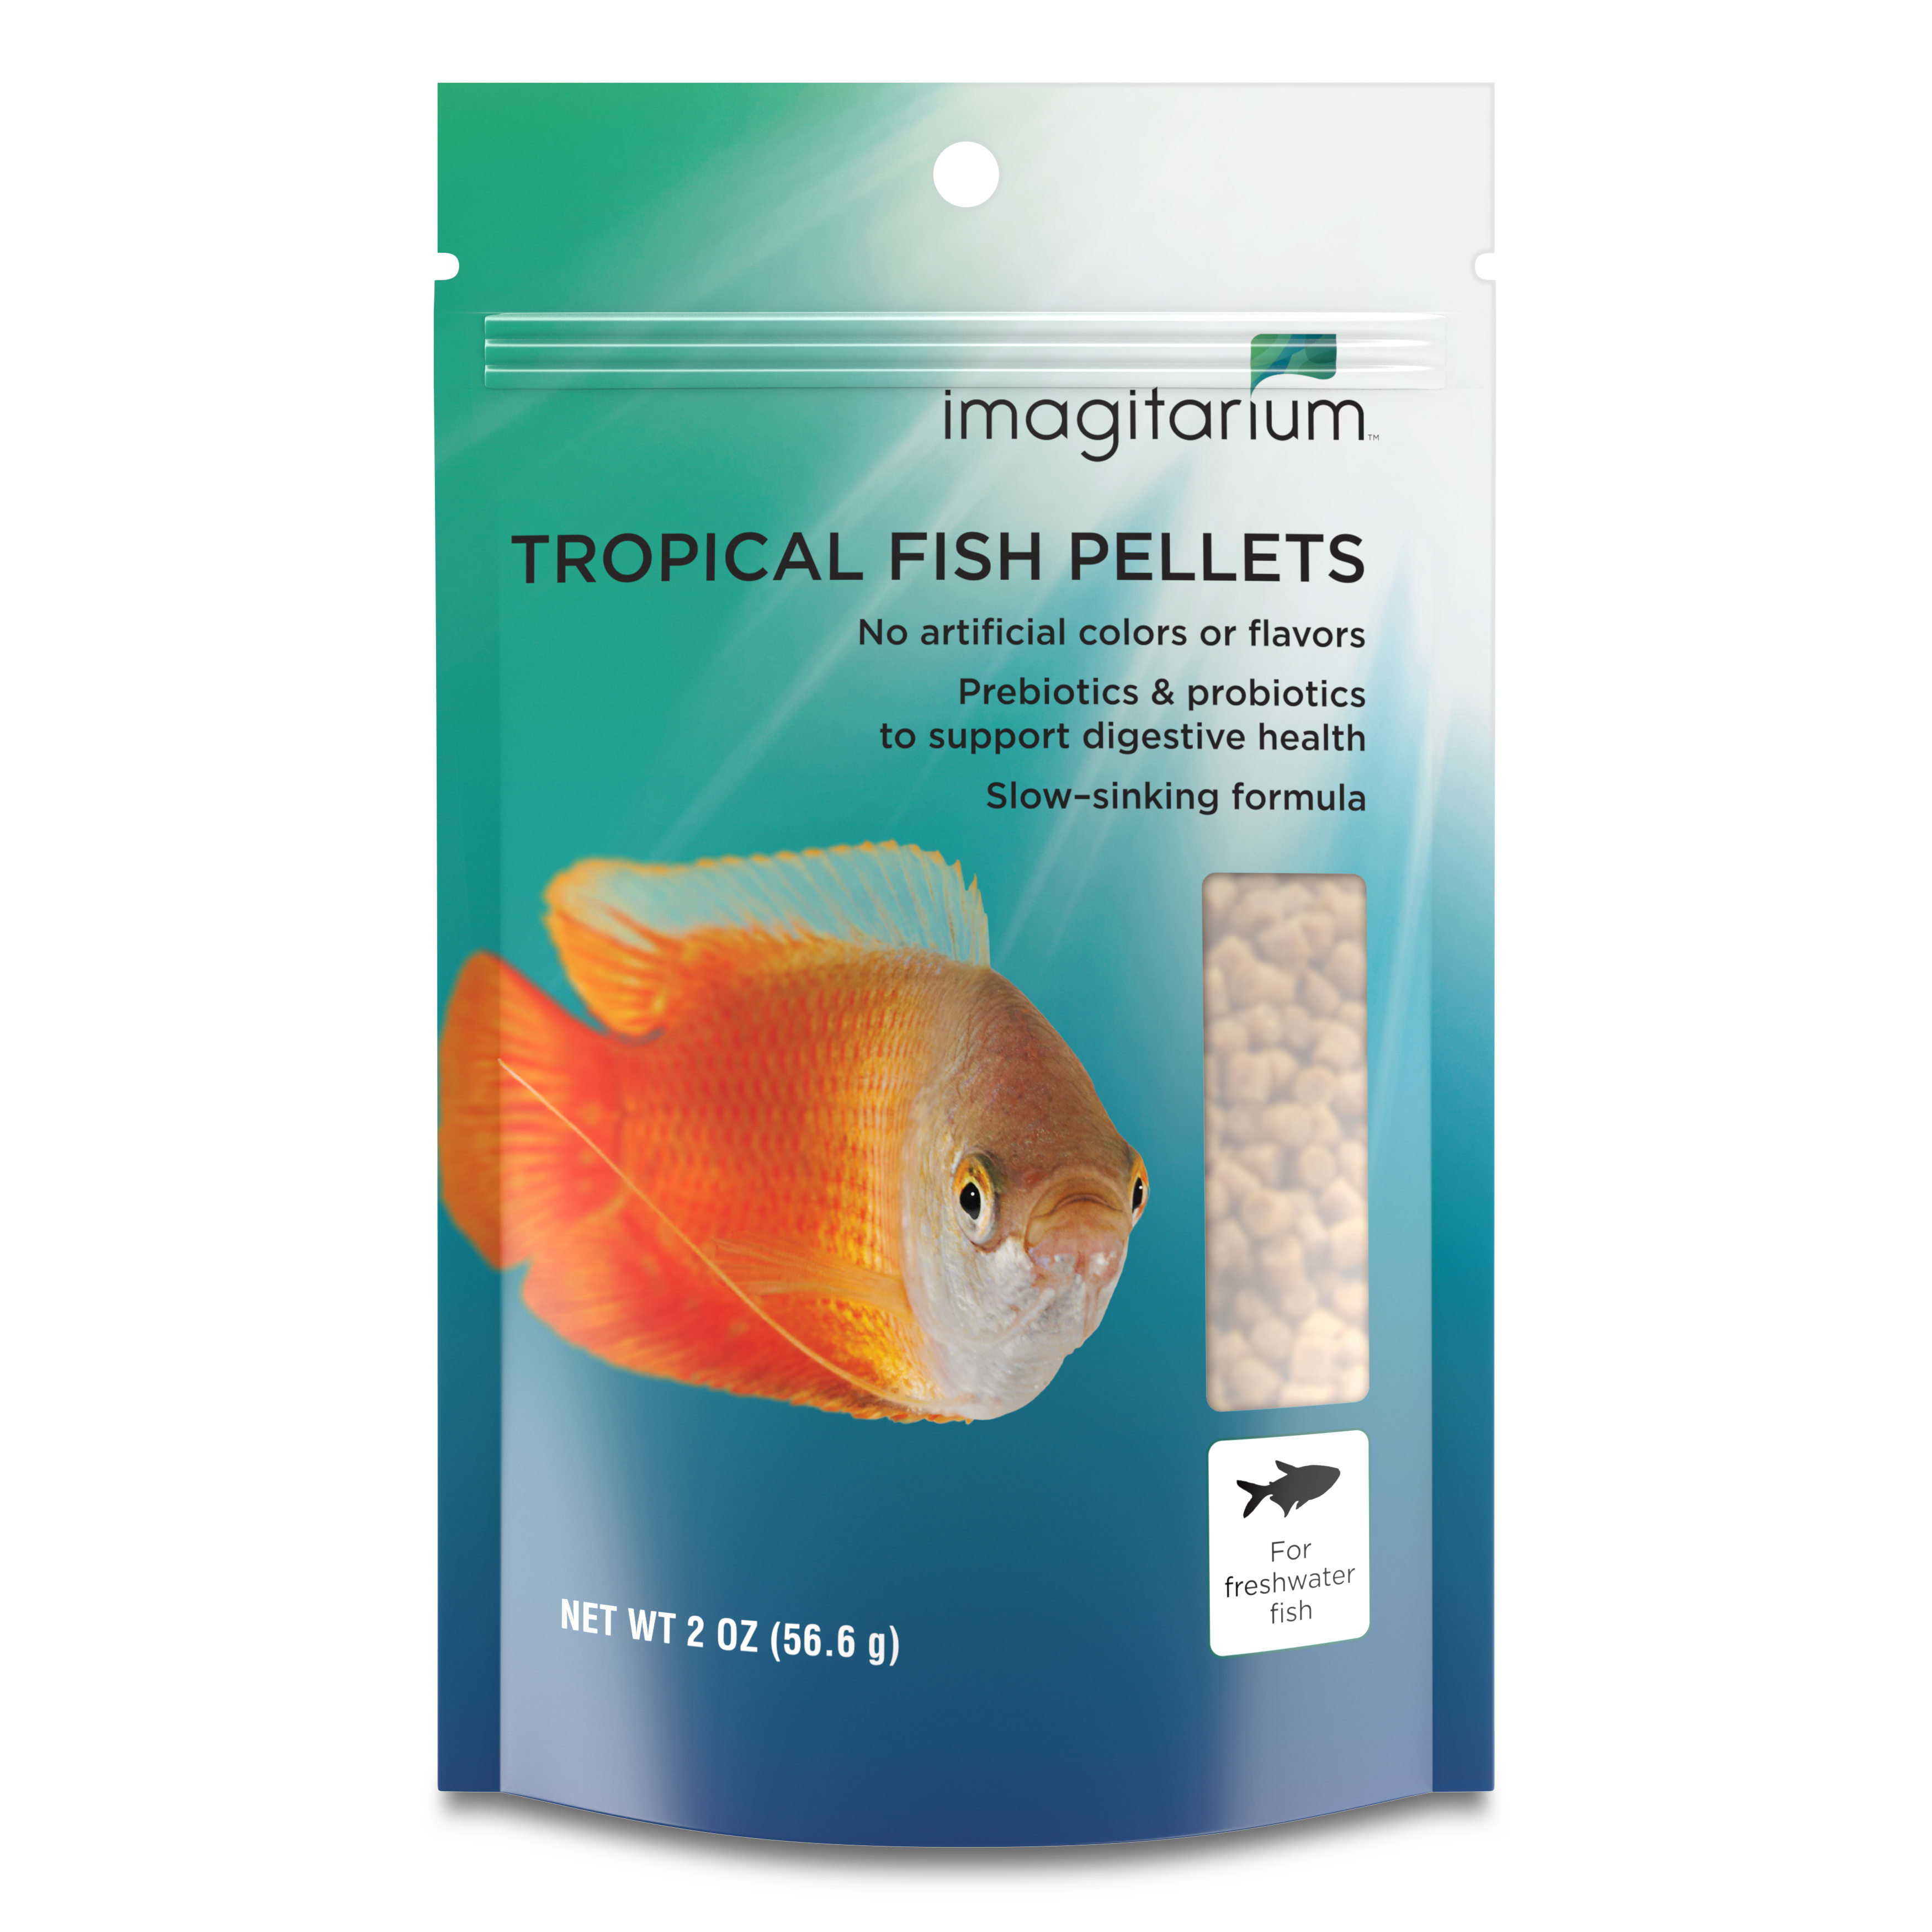 Imagitarium Freeze-Dried Krill Food for Freswater and Salt Water